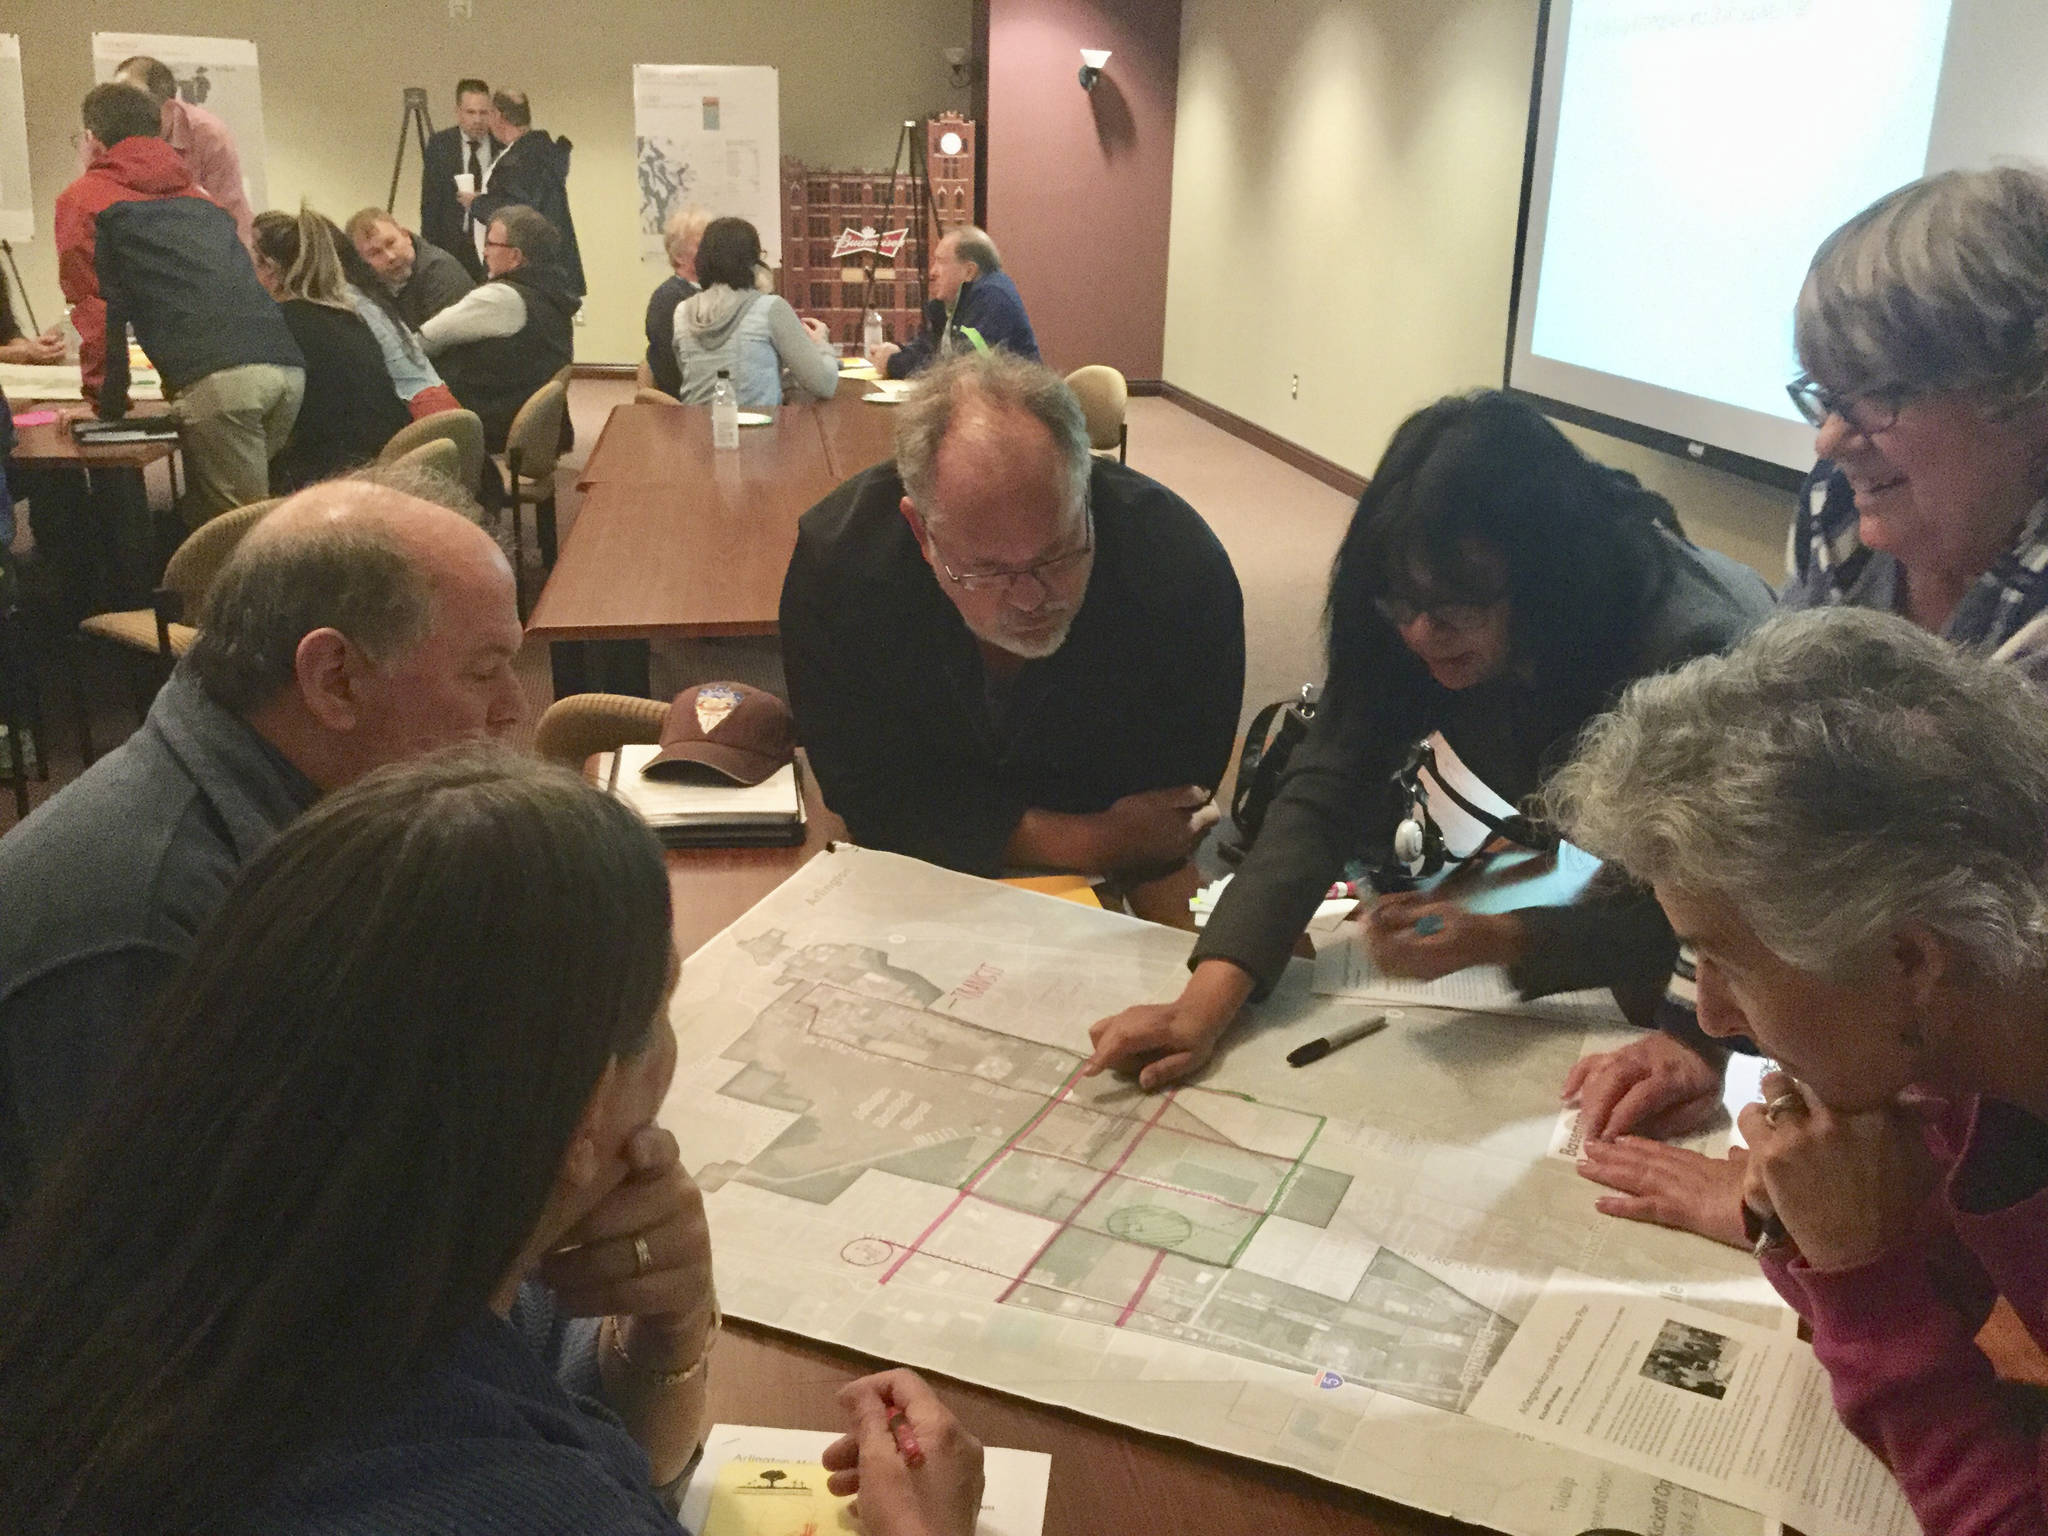 Subarea plan Project Manager Radhika Nair with Berk Consulting guides a discussion on mass transit and bike route infrastructure within the MIC.